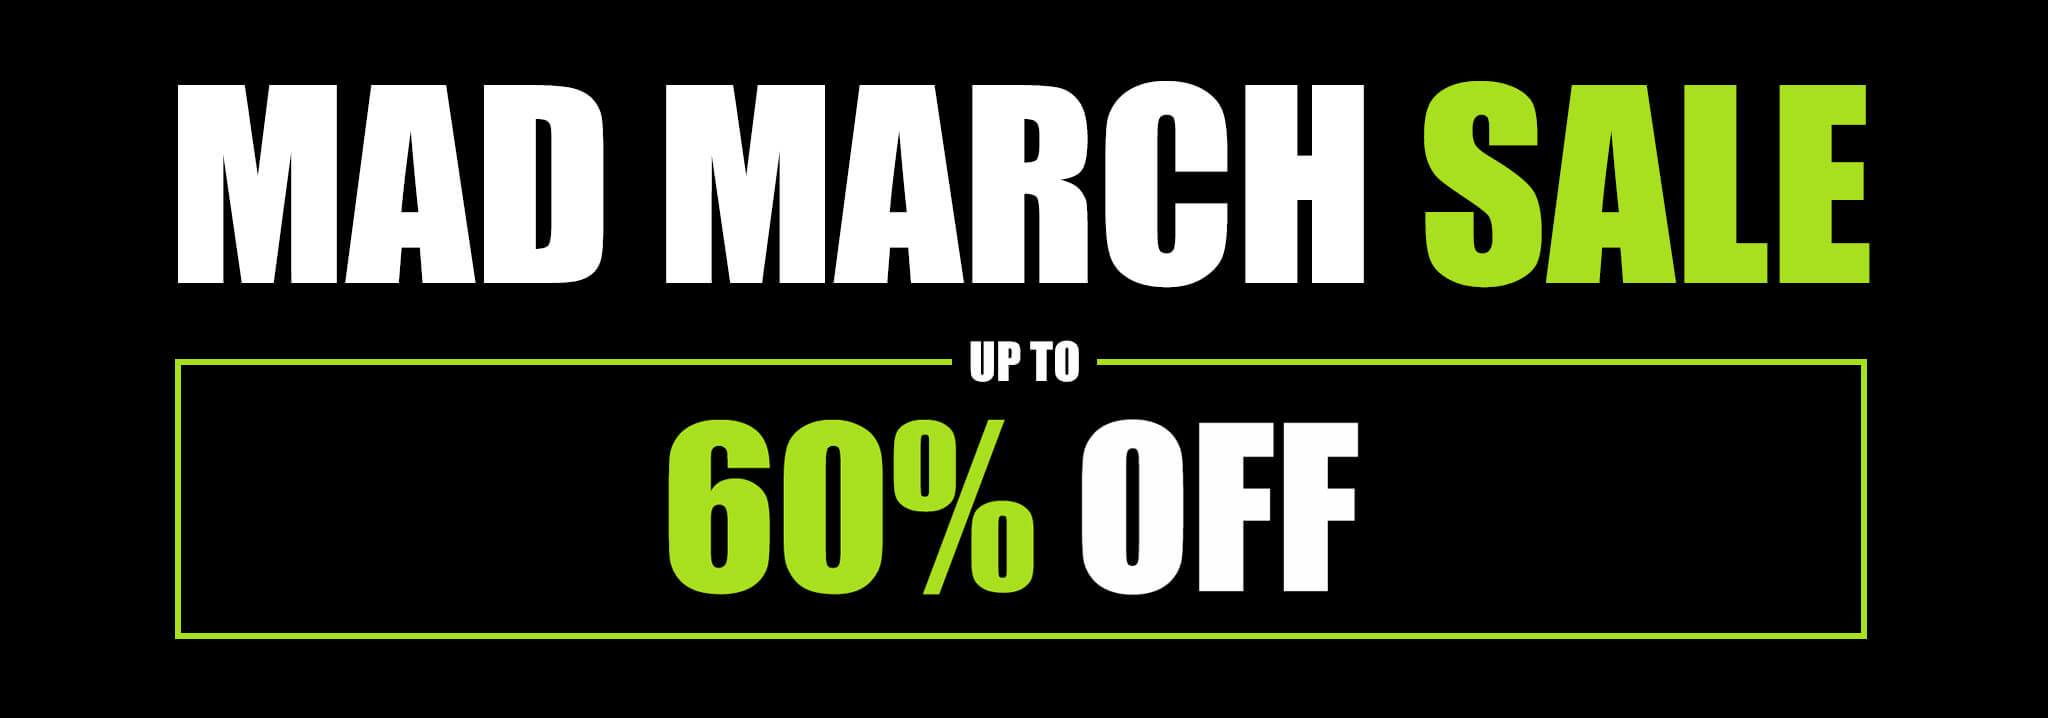 MAD MARCH SALE - Up to 60% OFF